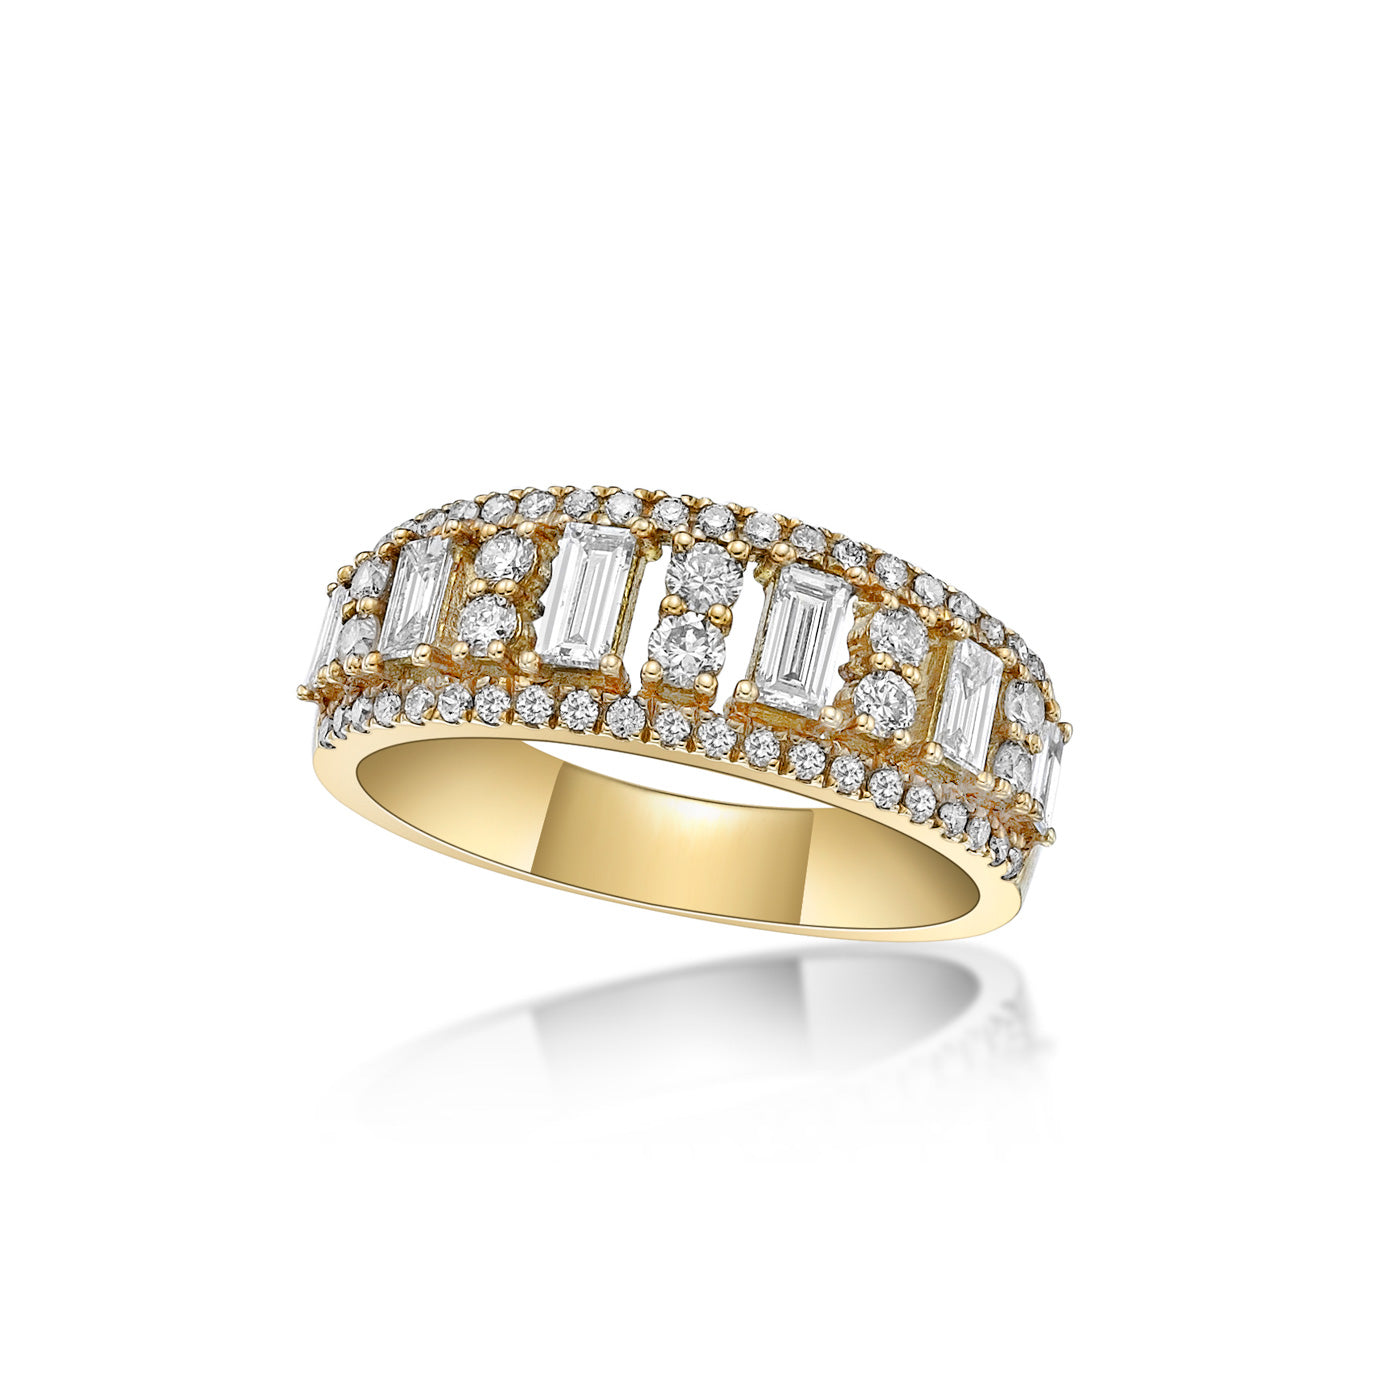 Handcrafted 18K Yellow Gold Round and Baguette Diamond Dress Ring